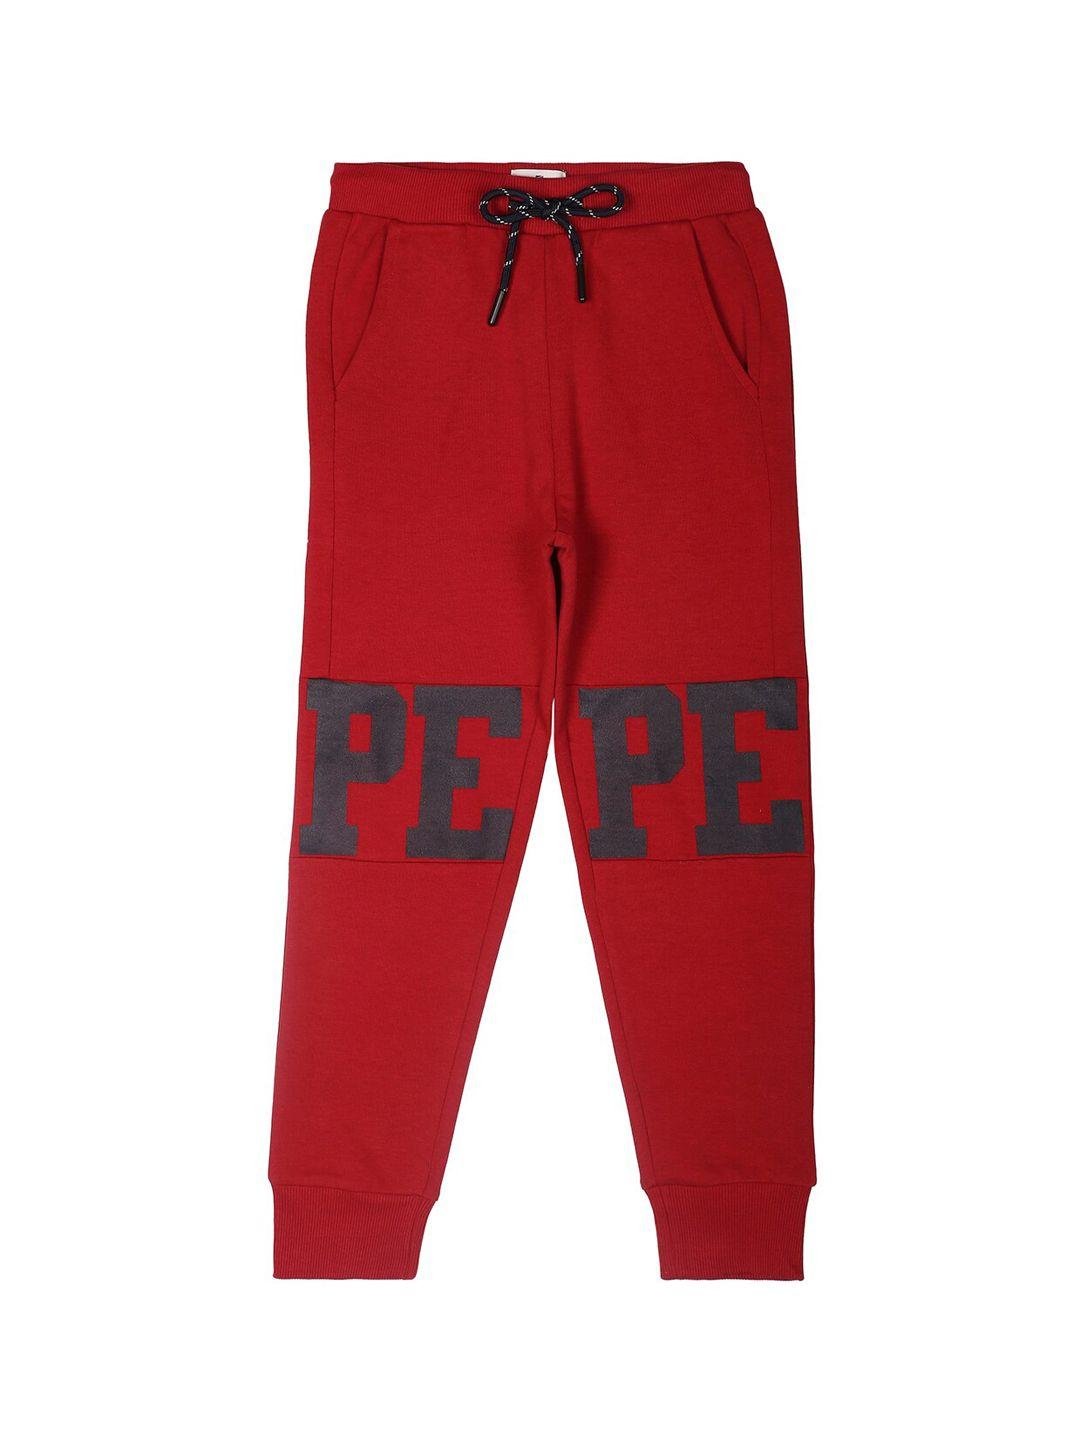 pepe-jeans-boys-mid-rise-brand-logo-printed-joggers